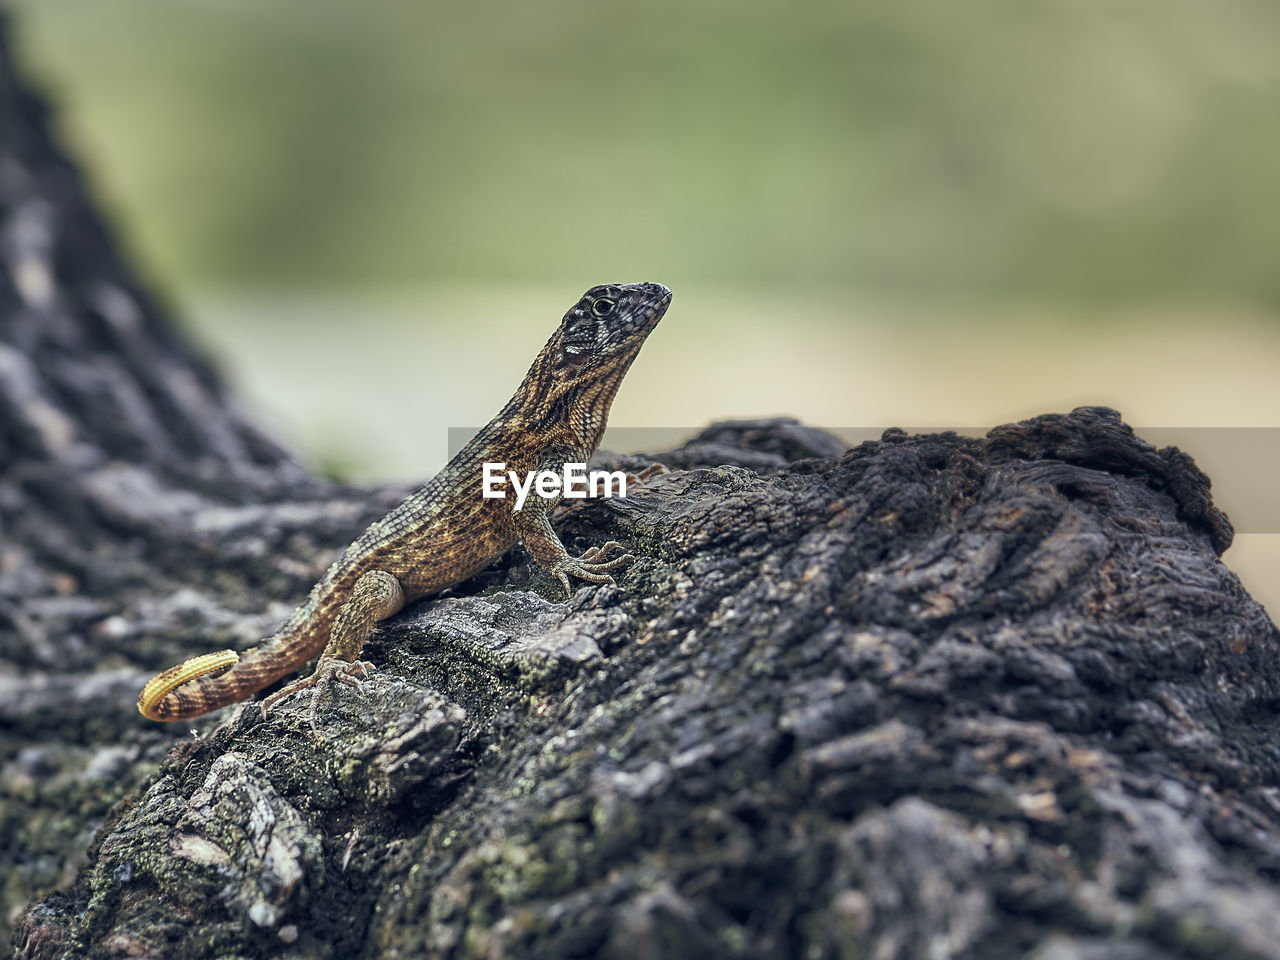 CLOSE-UP OF LIZARD ON ROCK AGAINST TREE